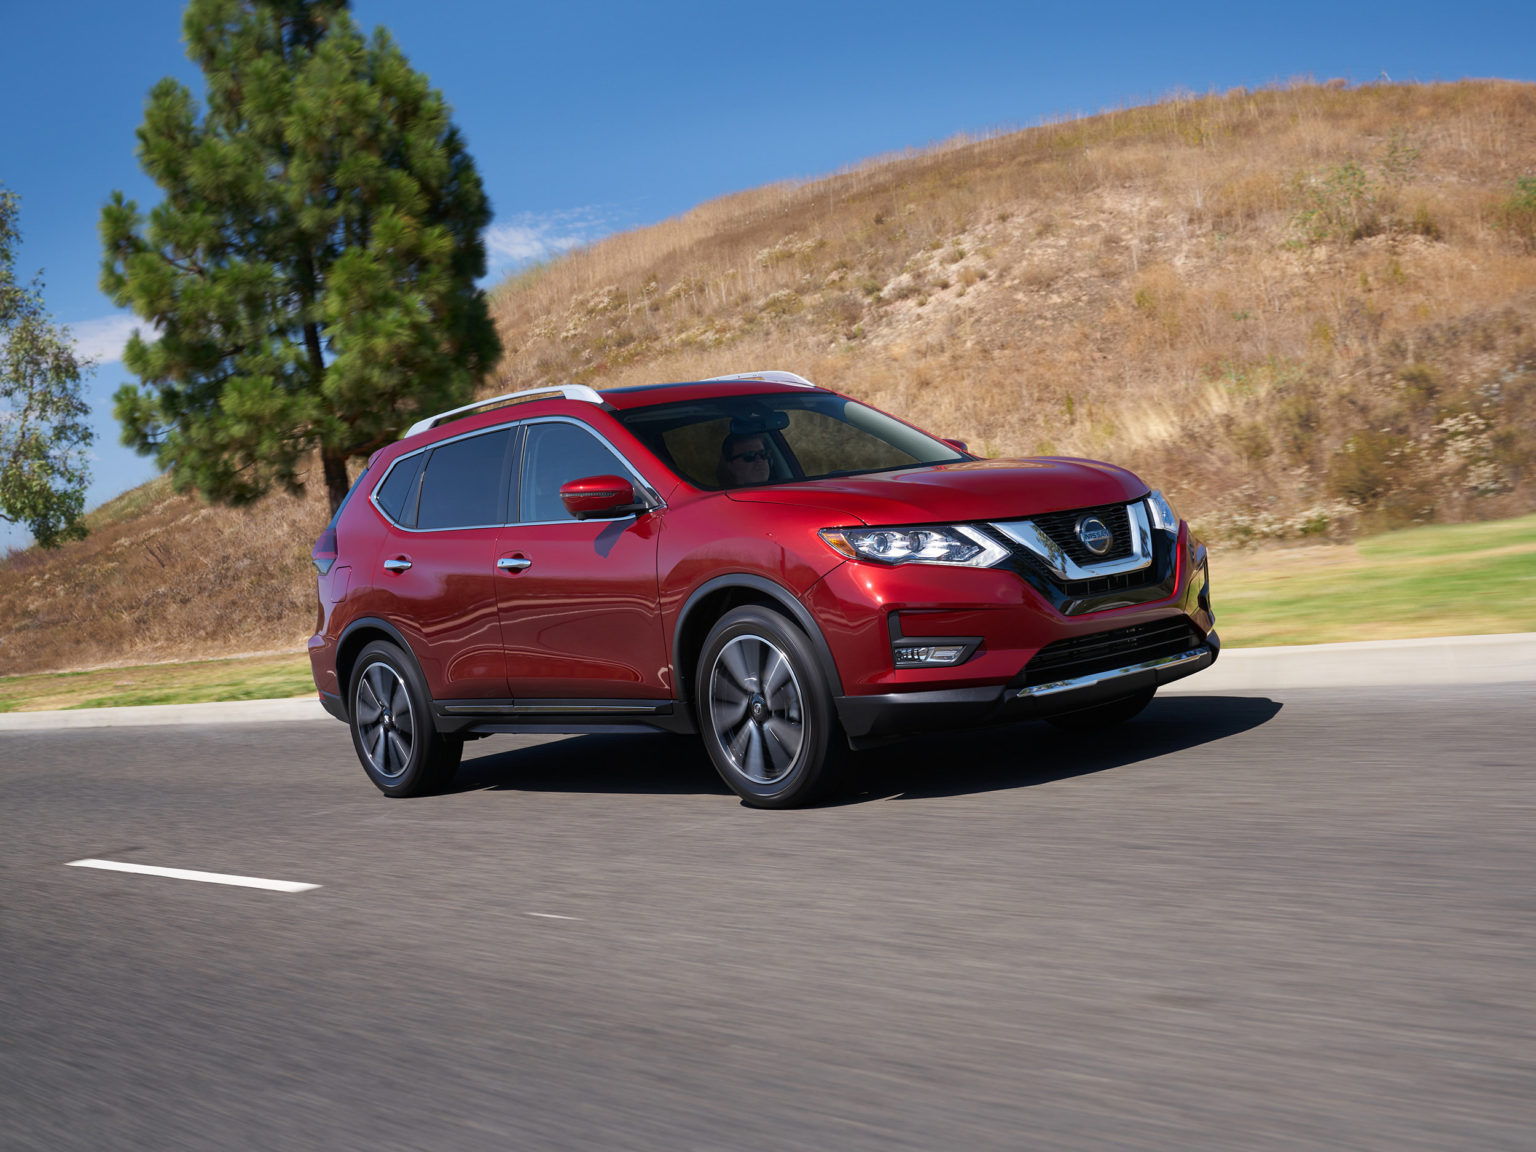 The Nissan Rogue is one of the most sought-after used cars in Atlanta.